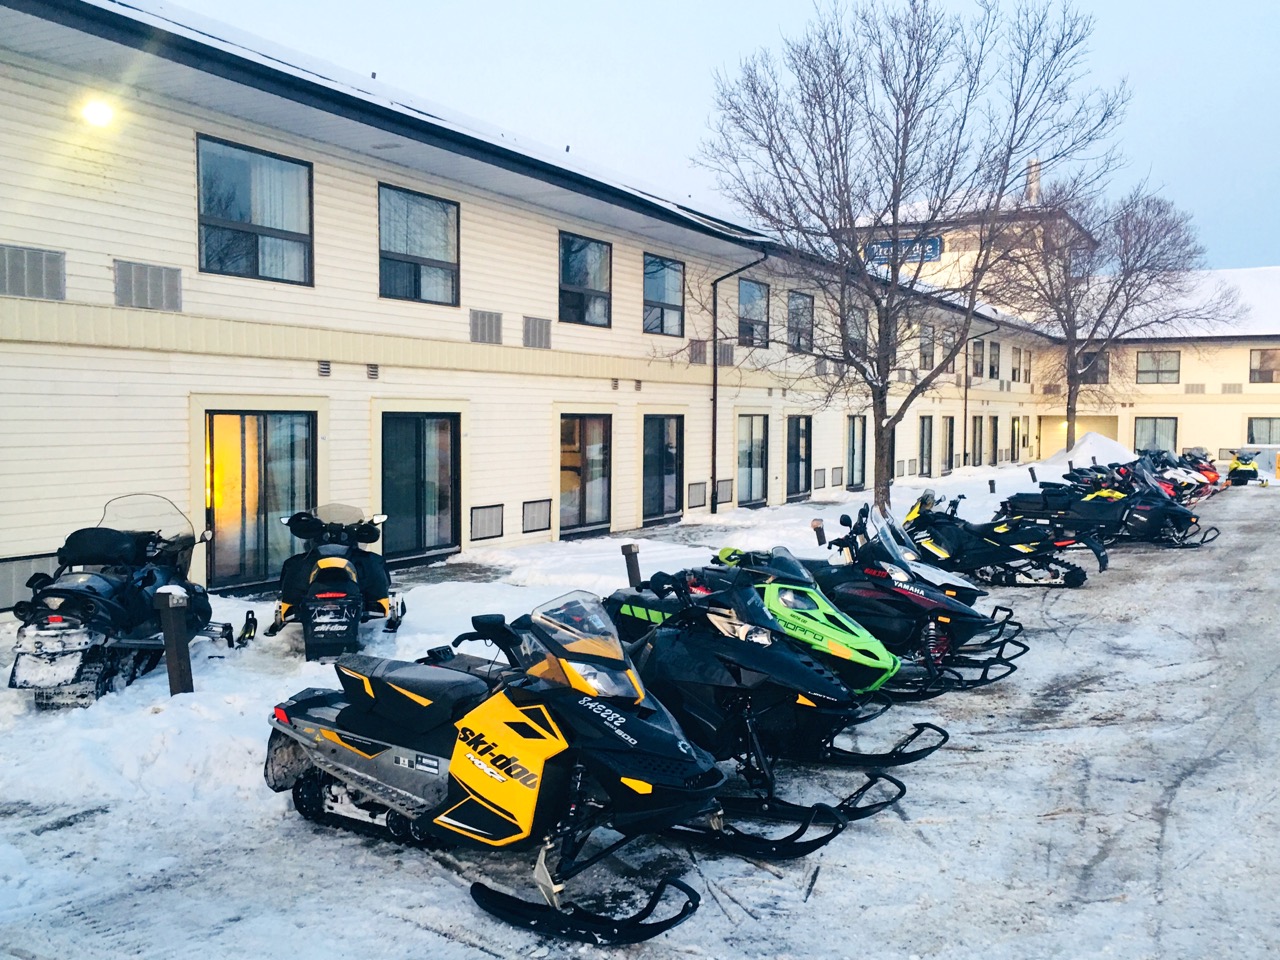 Finding Snowmobile Friendly Accommodations